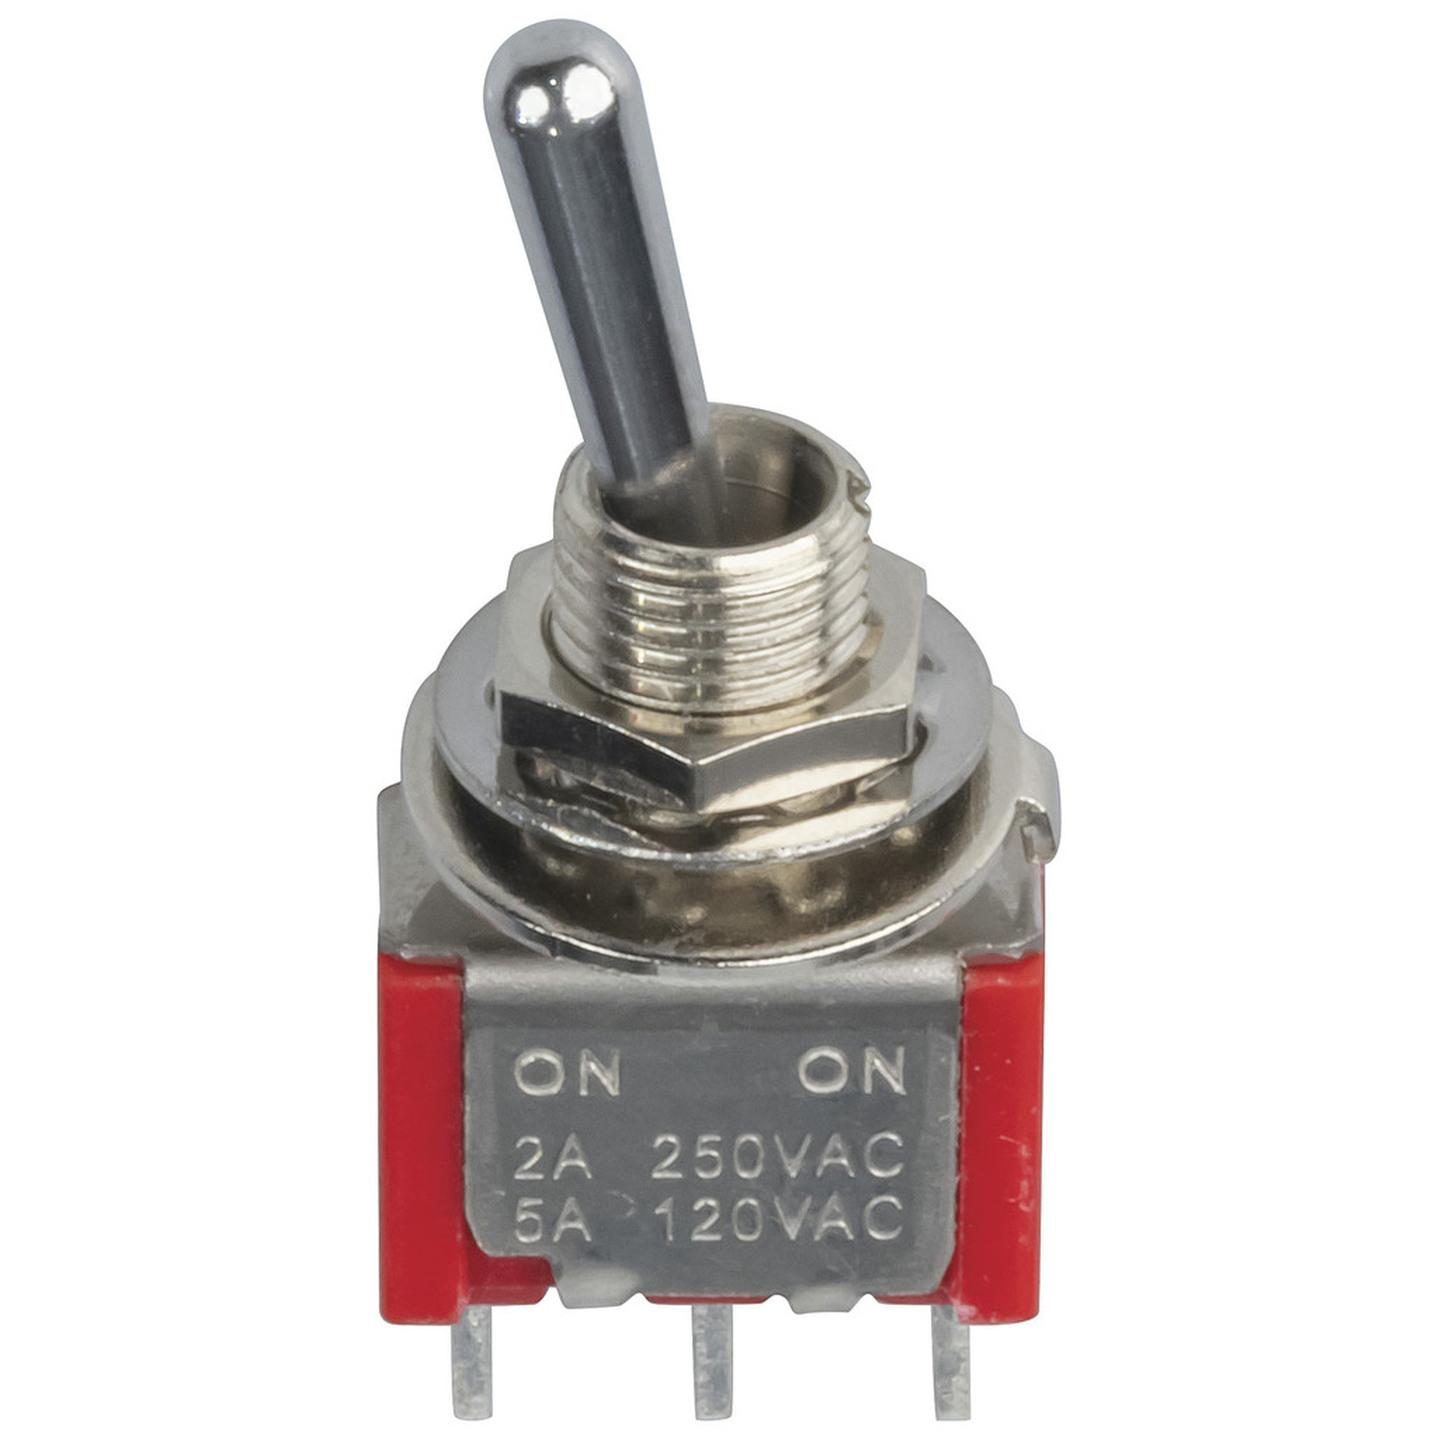 SPDT Miniature Toggle Switch - Solder Tag